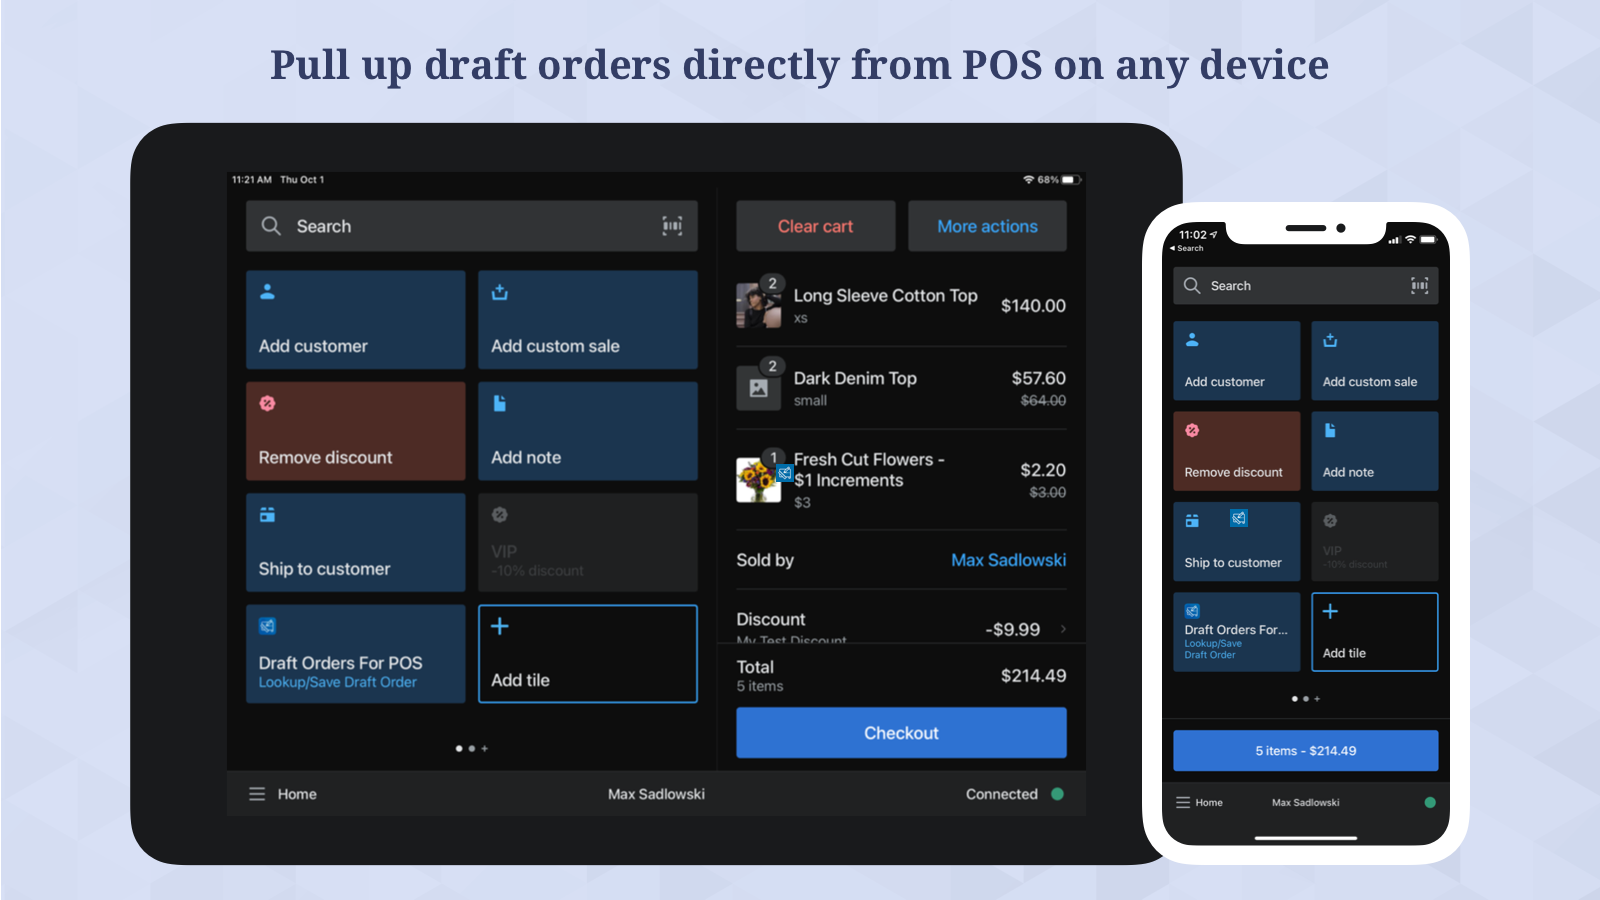 Pull up draft orders directly from POS on any device